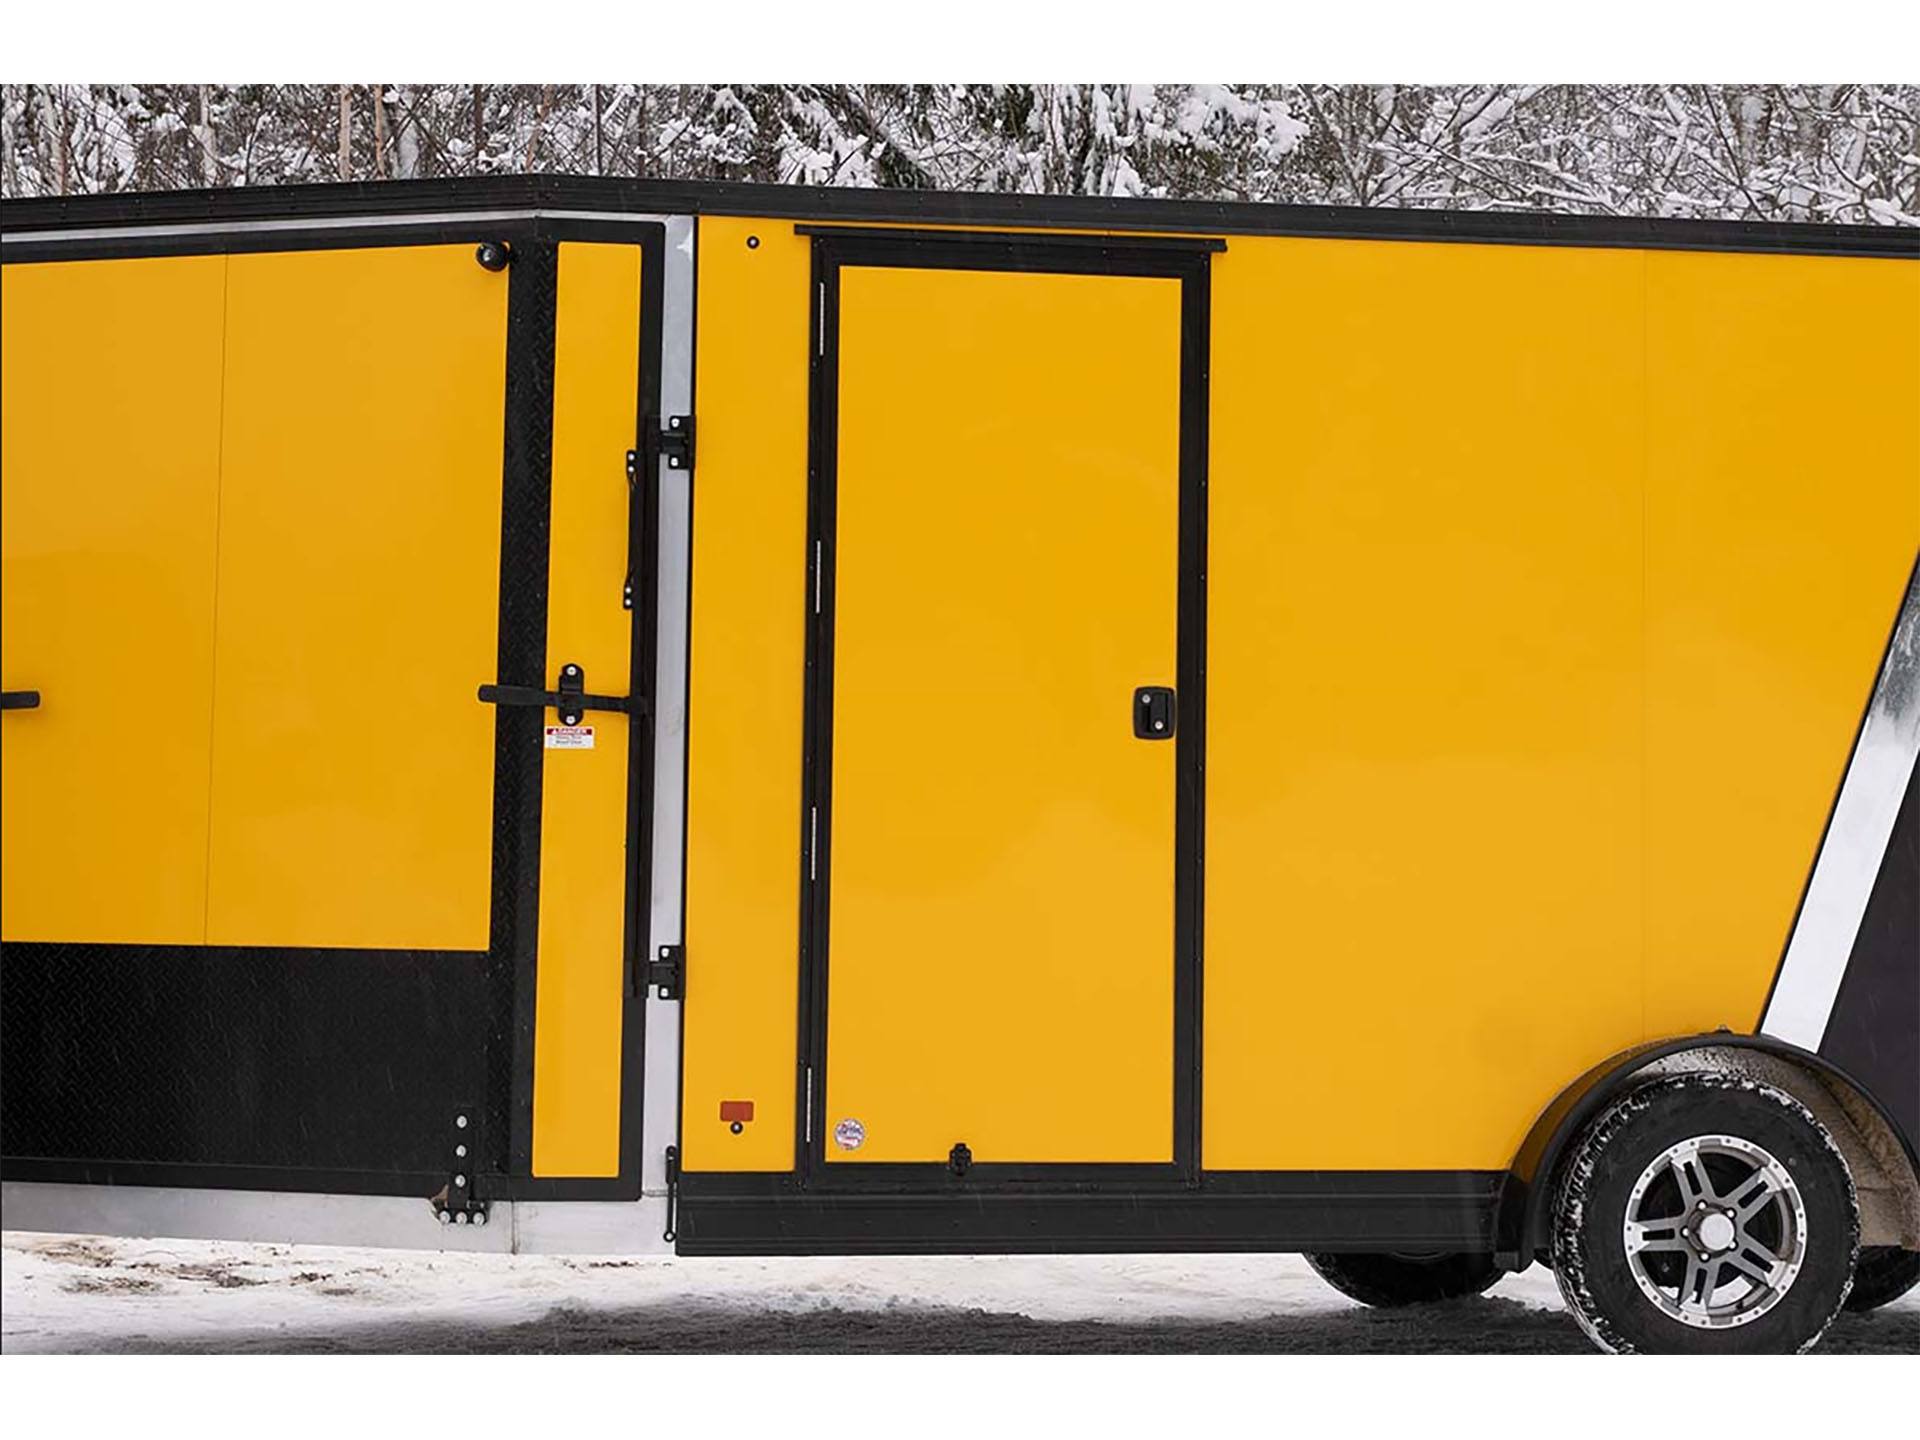 2024 Polaris Trailers Enclosed Cargo Trailers 6 ft. Wide - 12 ft. Long in Milford, New Hampshire - Photo 6